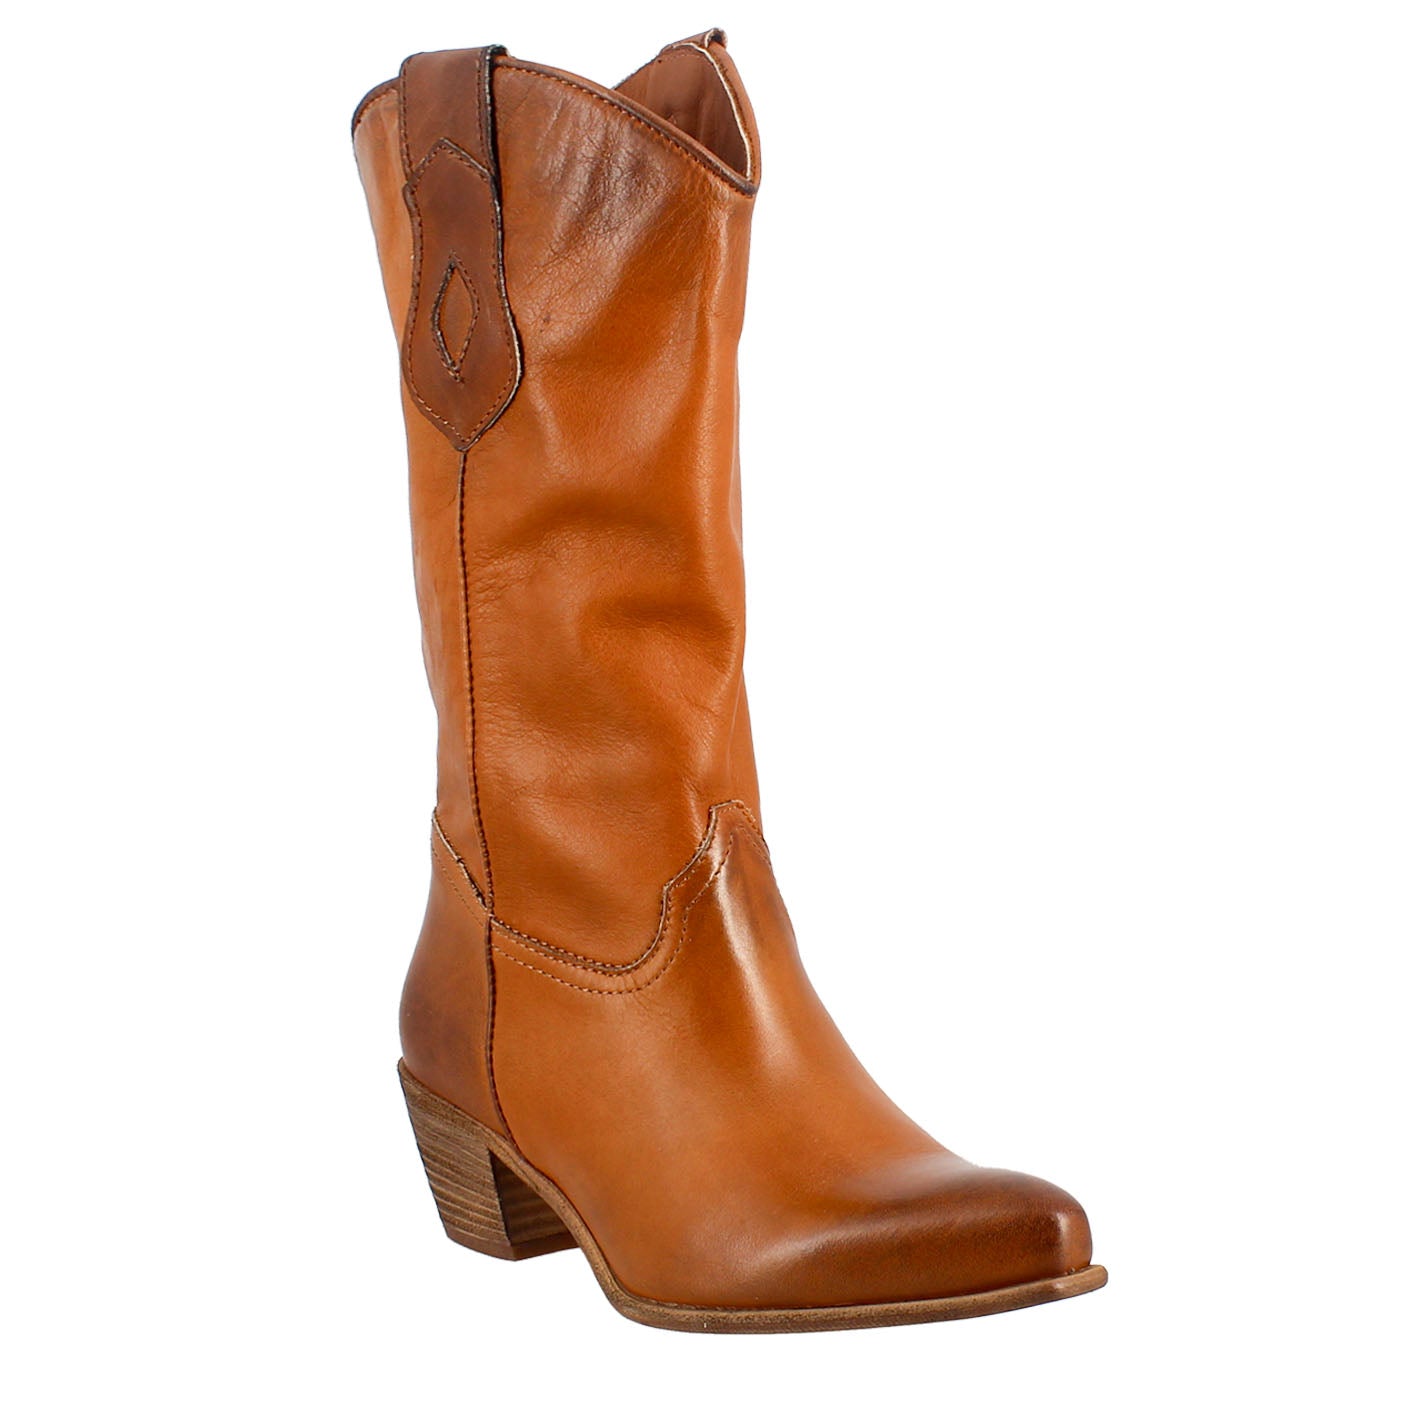 Women's Texan boots unlined in brown vintage leather.